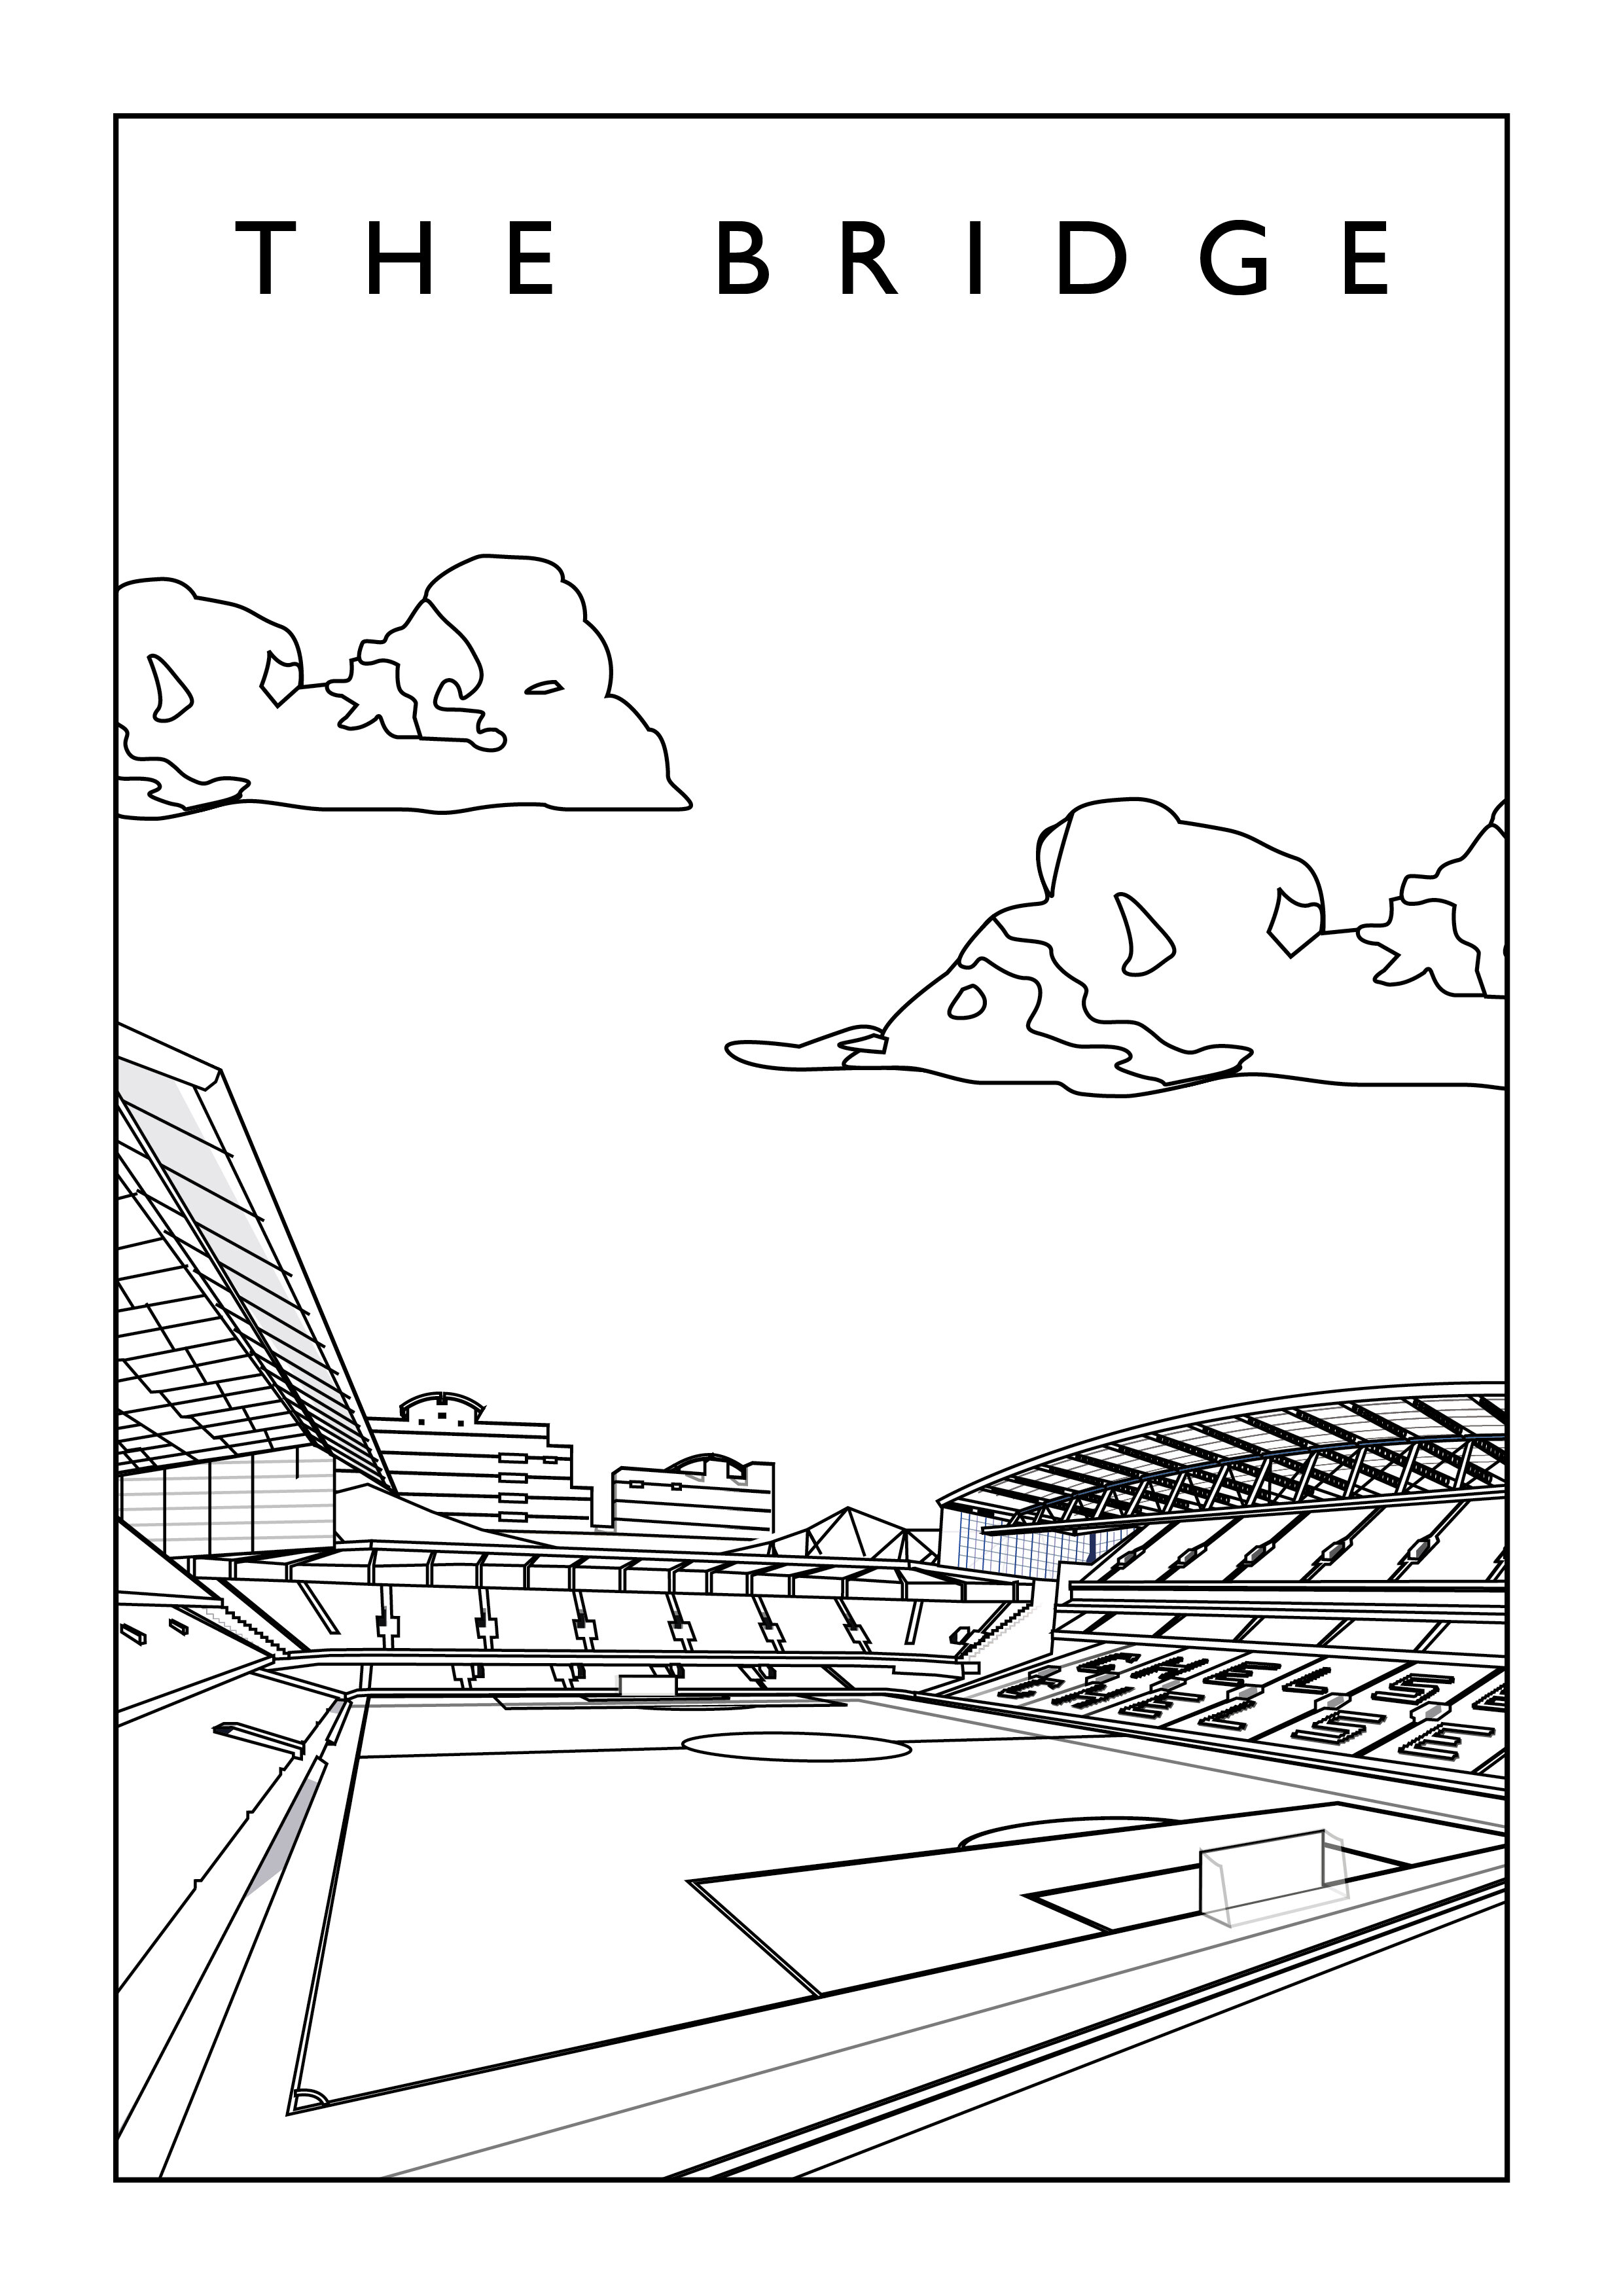 chelsea stamford bridge coloring pages